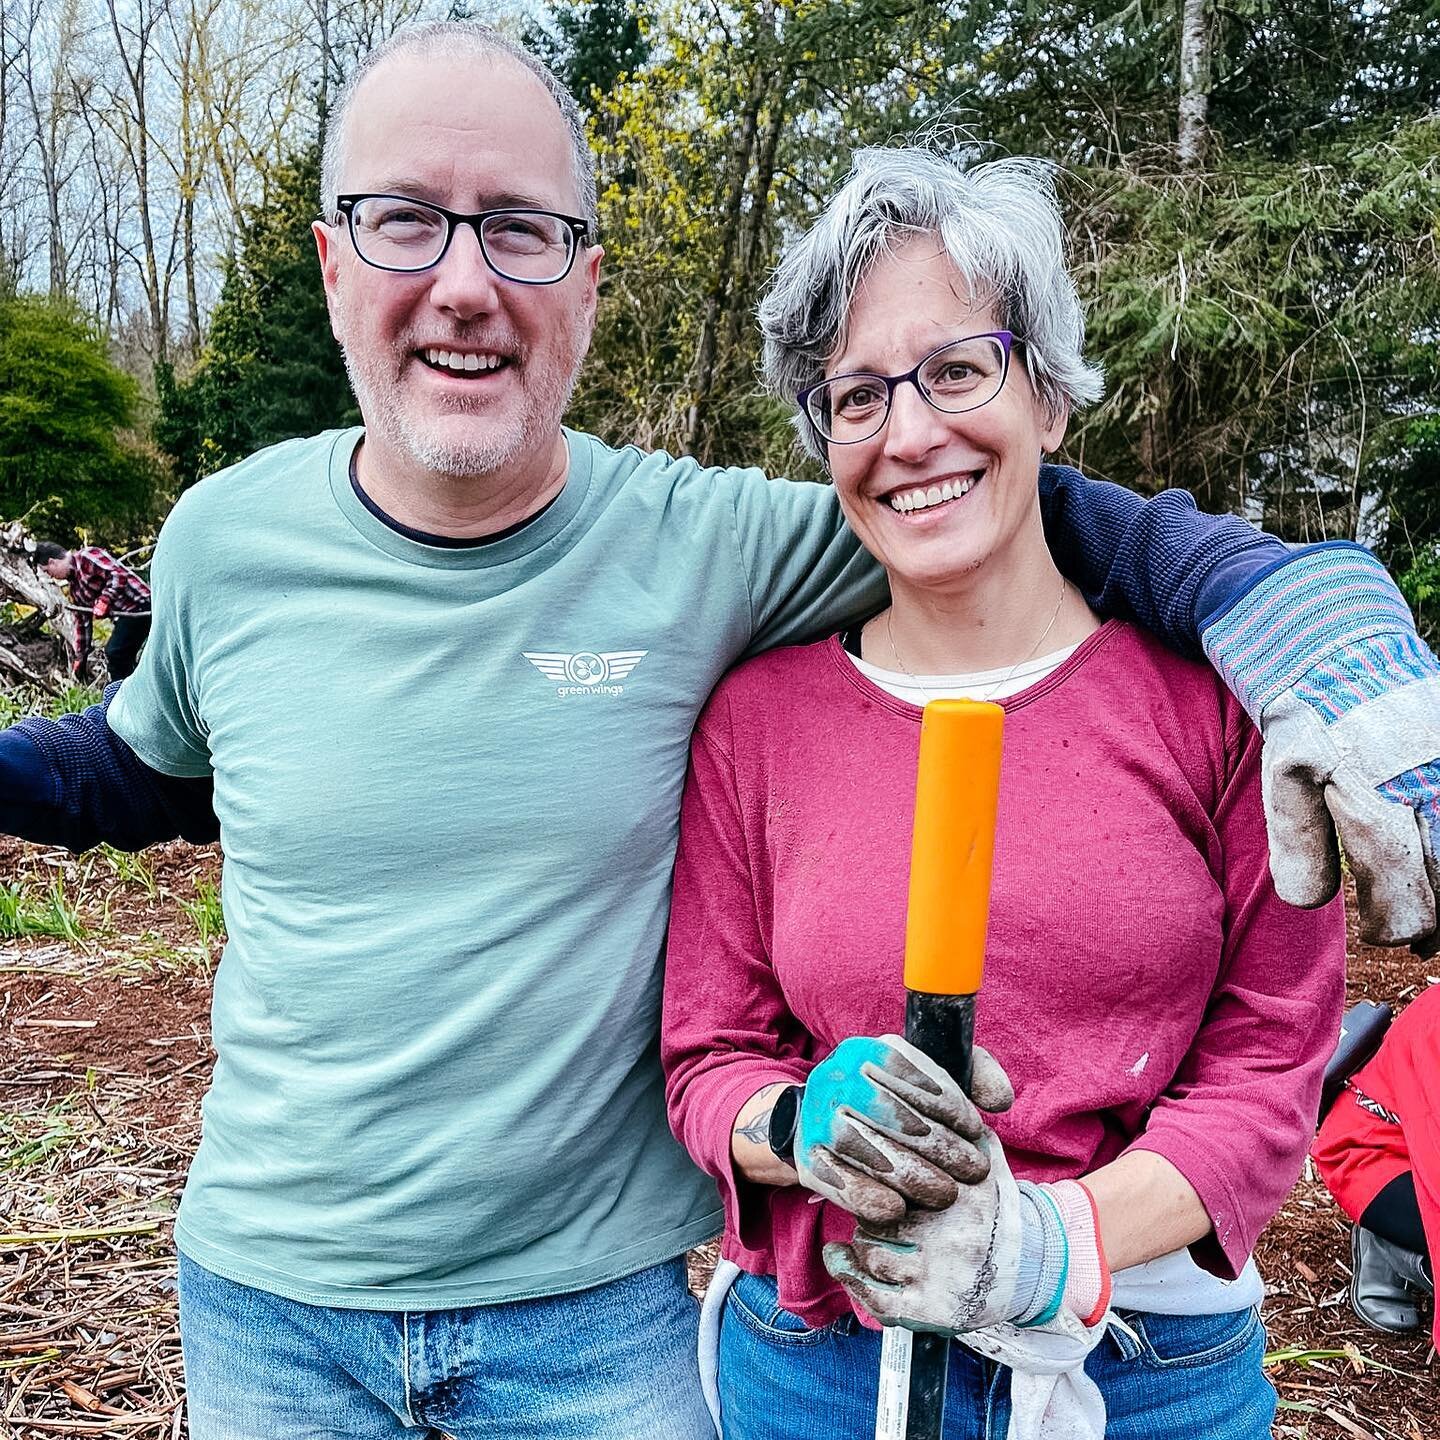 S E A T T L E
Earth Month Recap

Thank you to everyone who joined us at our Earth Month event helping to restore this Seattle salmon habitat

Shout out to Green Wings SEA Ambassador, Craig for organizing